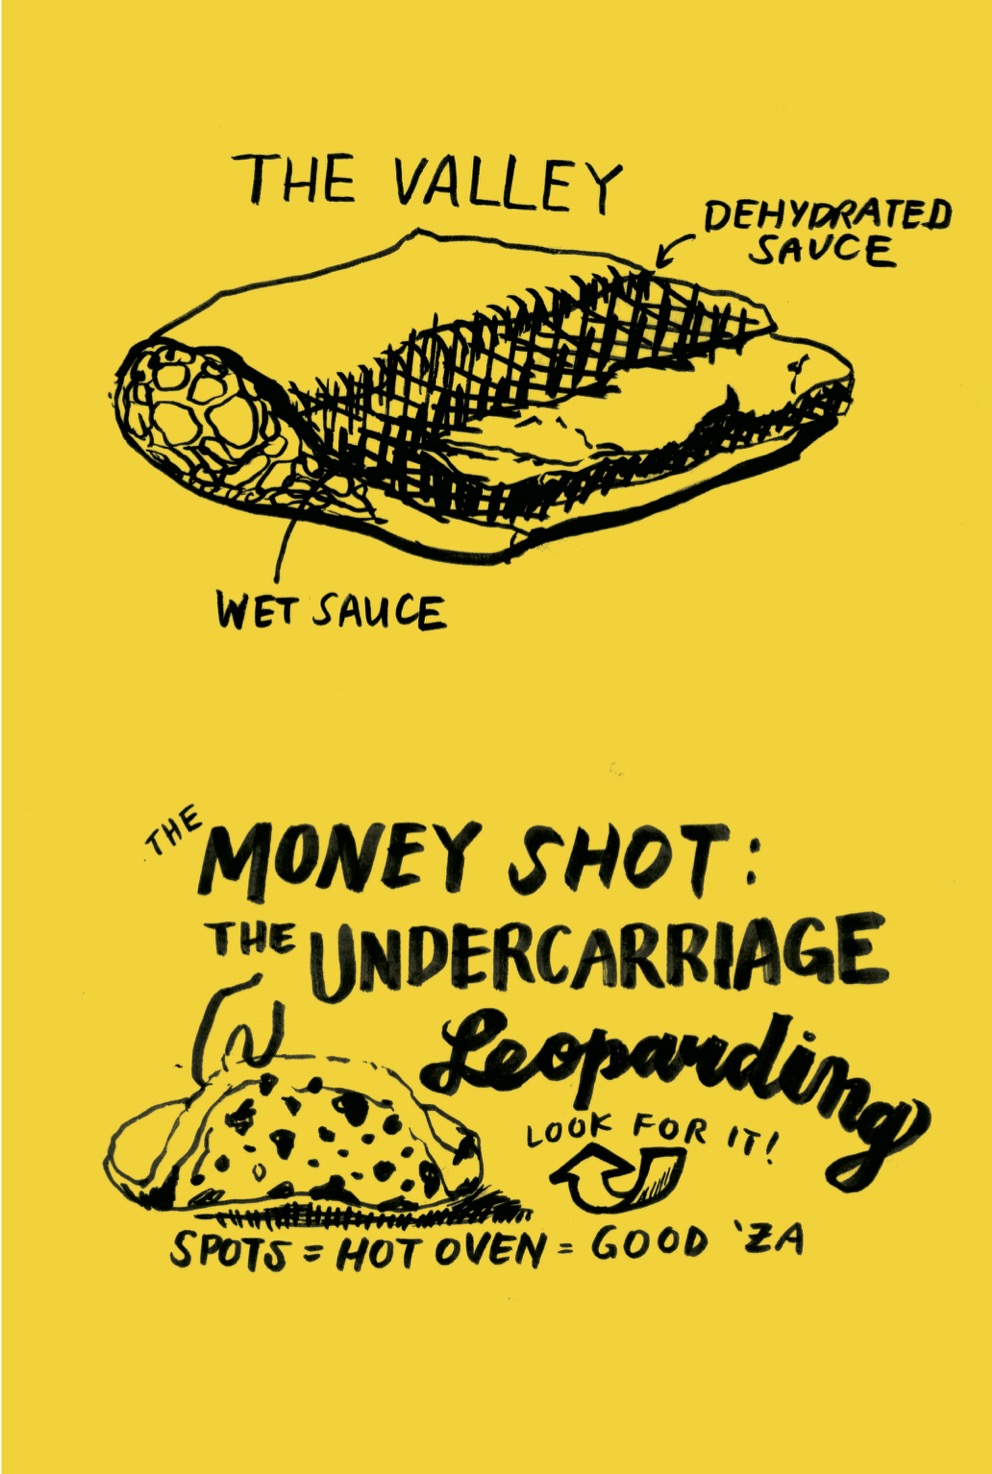 Two illustrations of a slice of pizza, one showing the "valley" of wet and dehydrated sauce under the crust, the other showing the "money shot" of the spotted undercarriage.